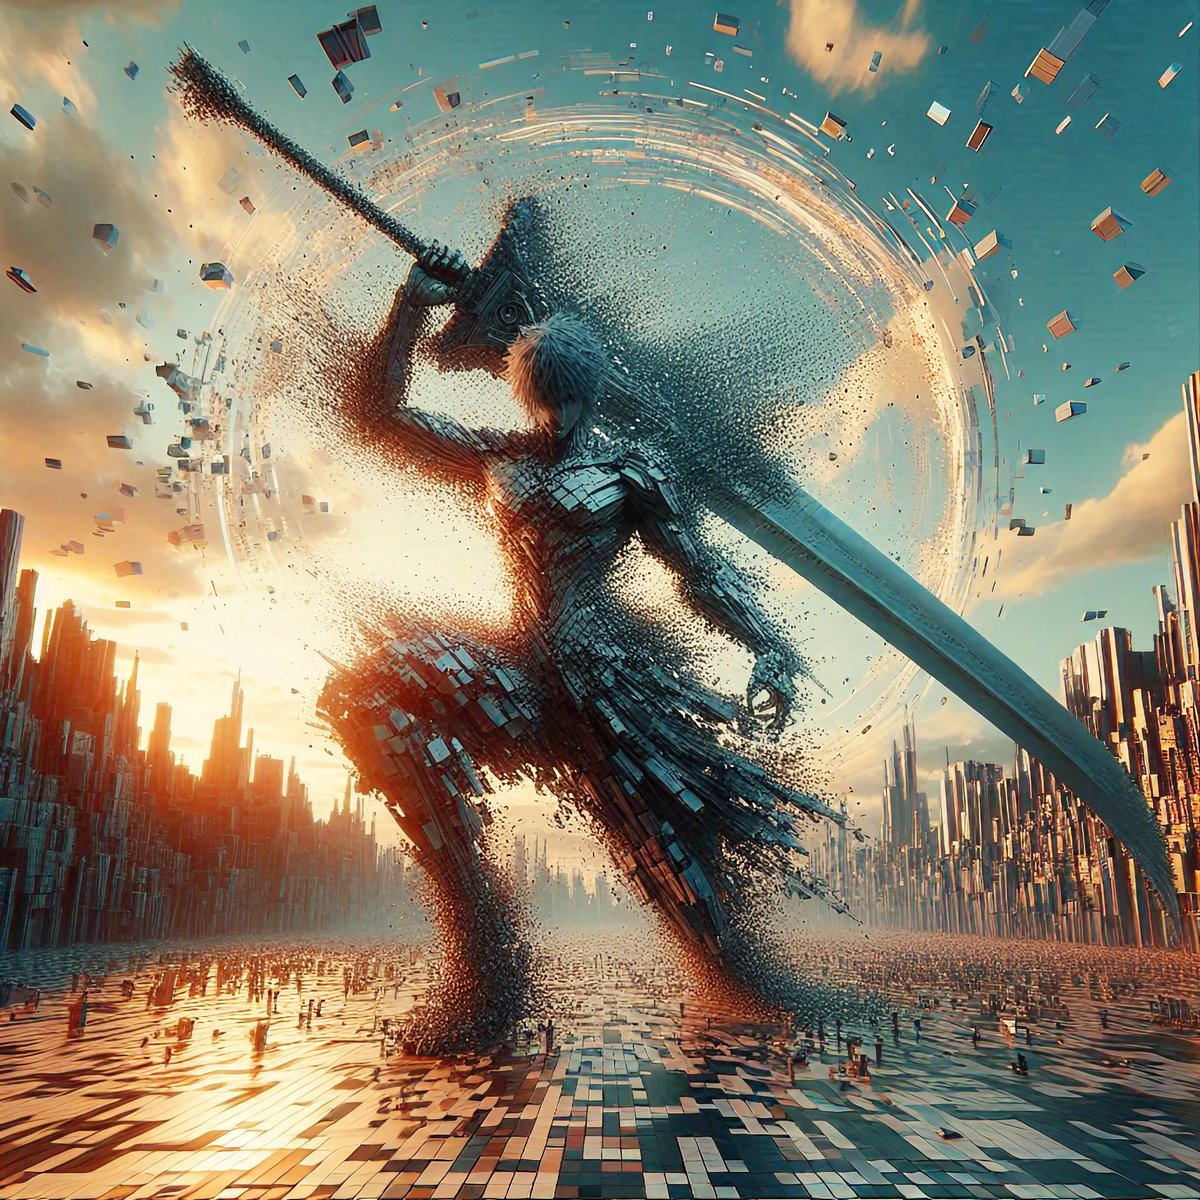 Good morning, warriors! ☀️☕️♥️ Have a glorious day! Be brave! ⚔️🔥👋😃 - Smash It - #aiDigitalArt | #SciFi | #Fantasy